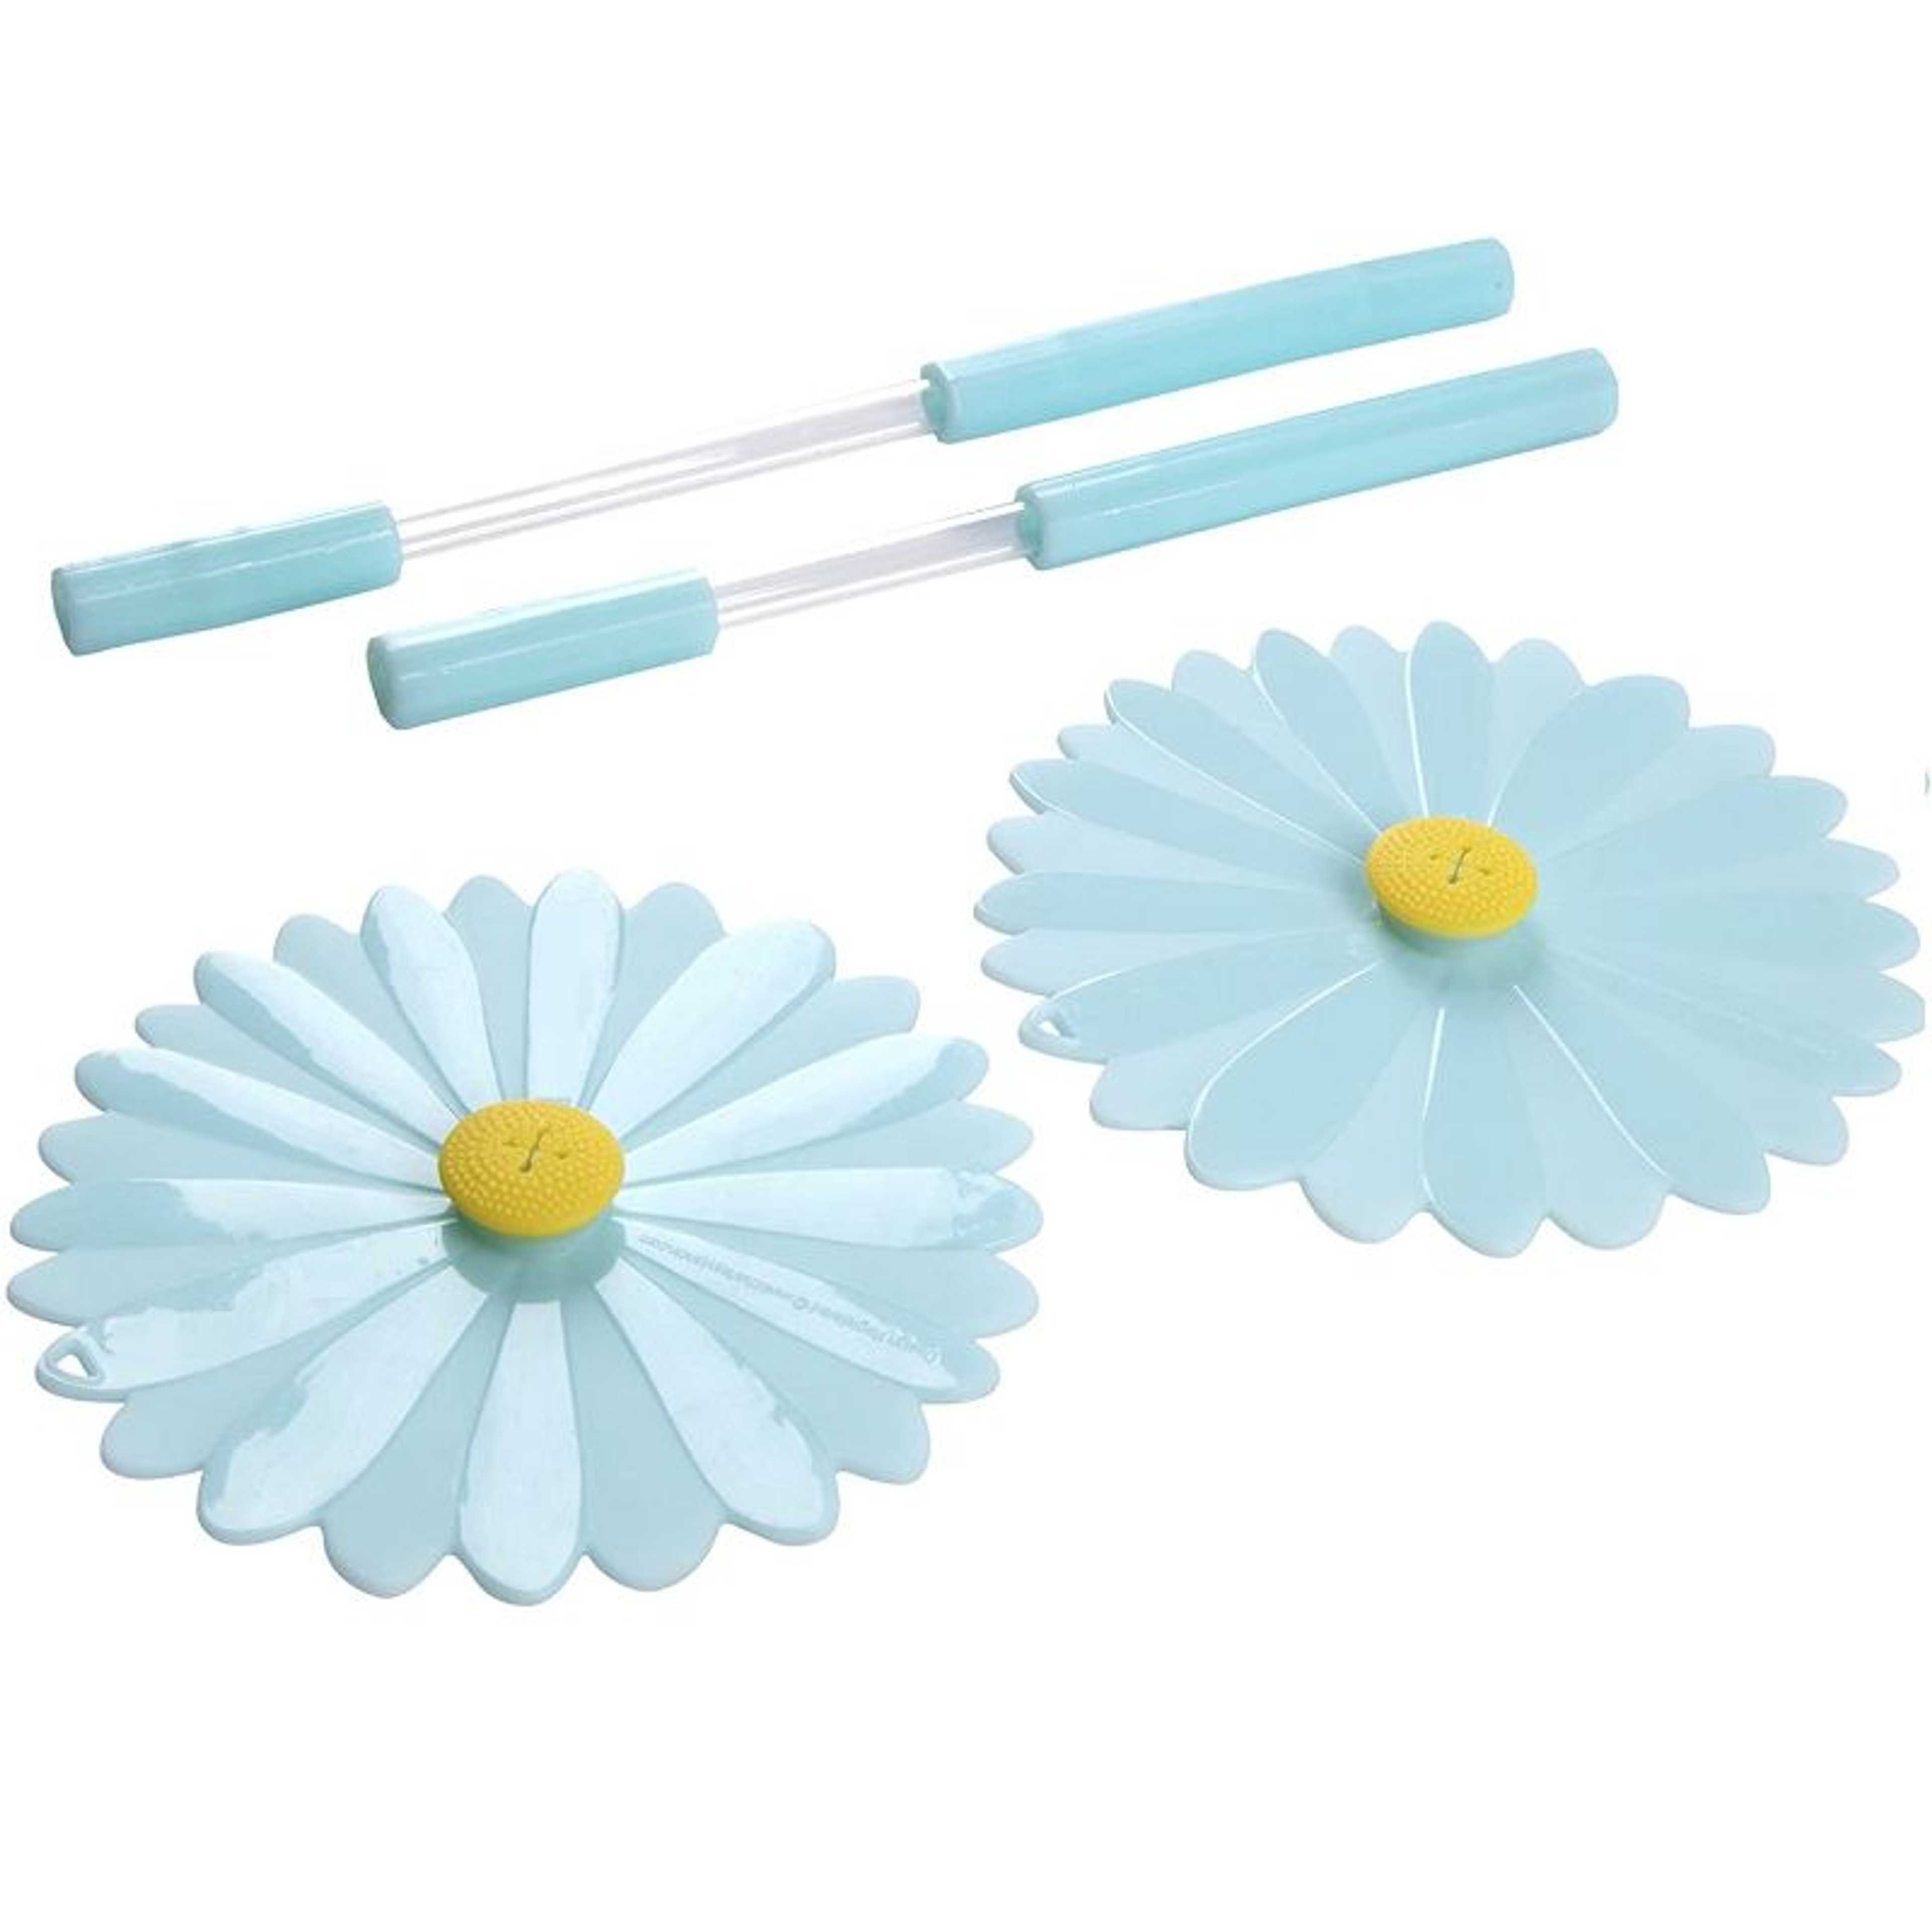 Random Color - Silicone Cover Sippers with Straws Set, 2 Pcs Cover & Sip Set, Silicone Sipper Set